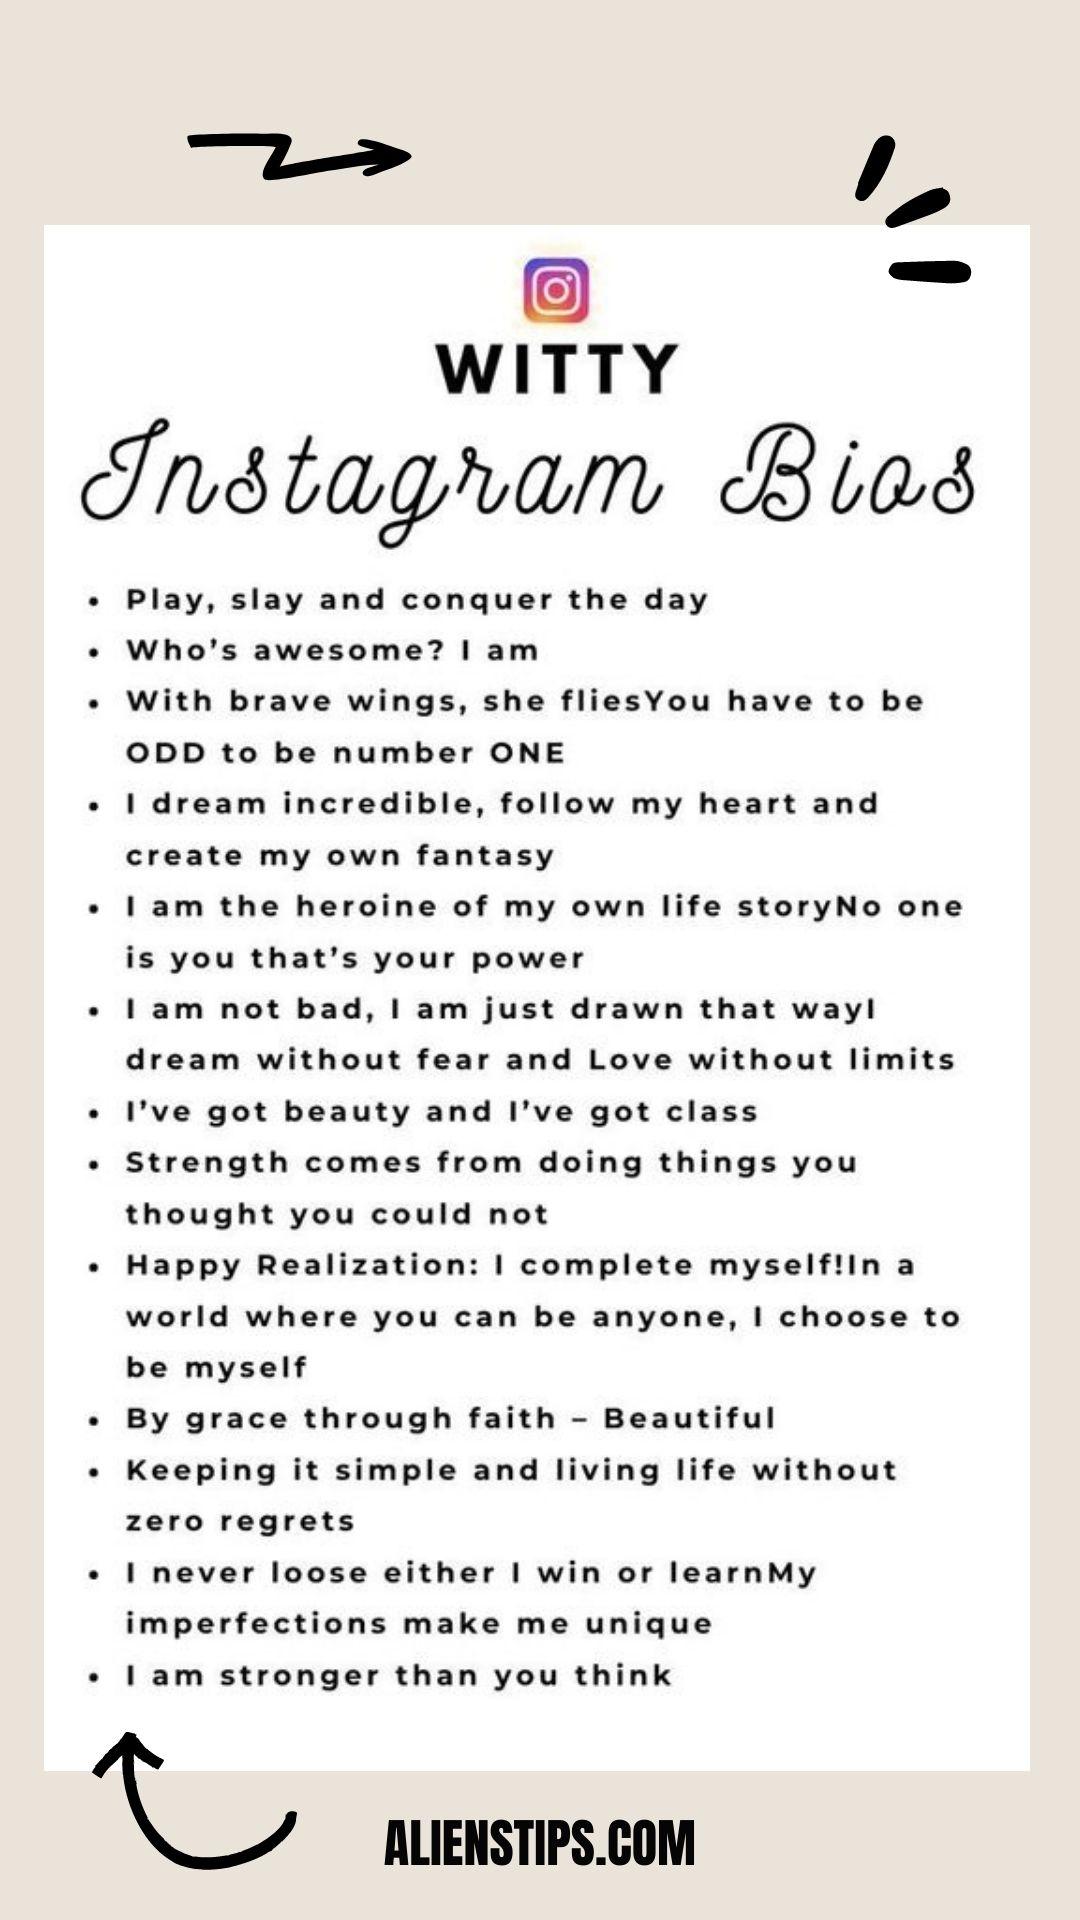 What Are Some Of The AMAZING [INSTAGRAM BIOS]? - Aliens Tips